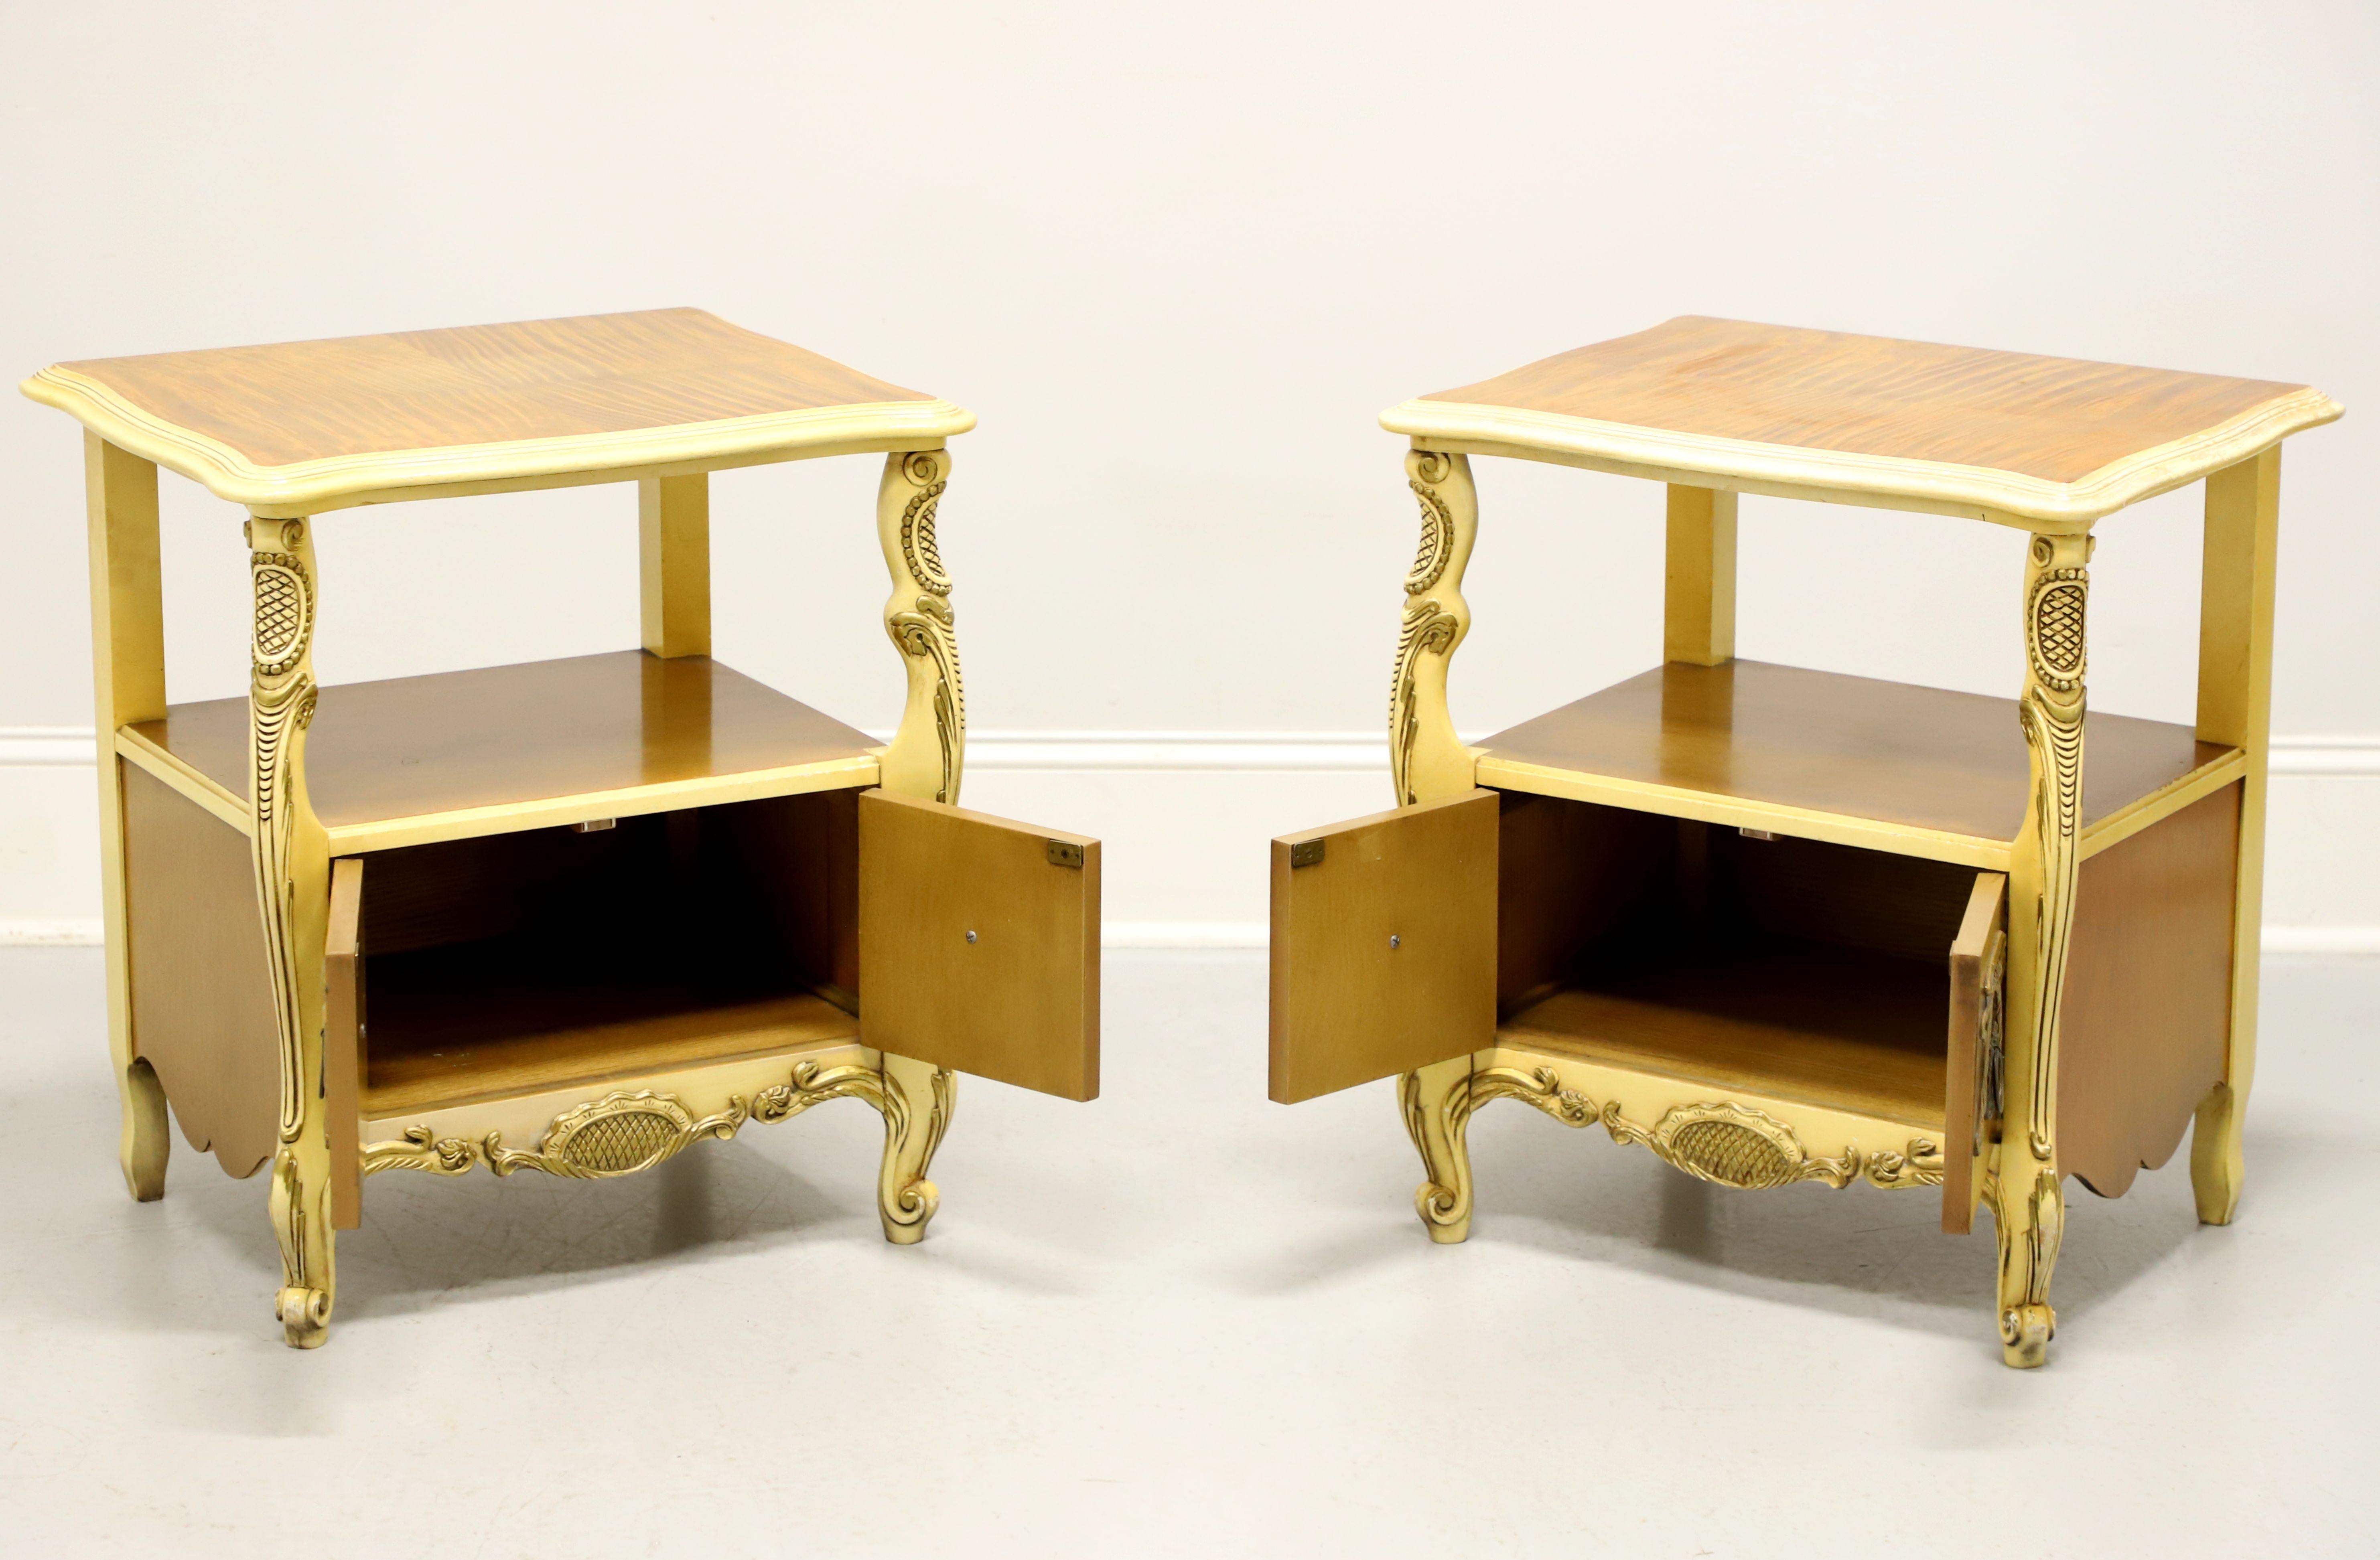 Brass ROMWEBER Mid 20th Century Satinwood French Provincial Nightstands - Pair For Sale